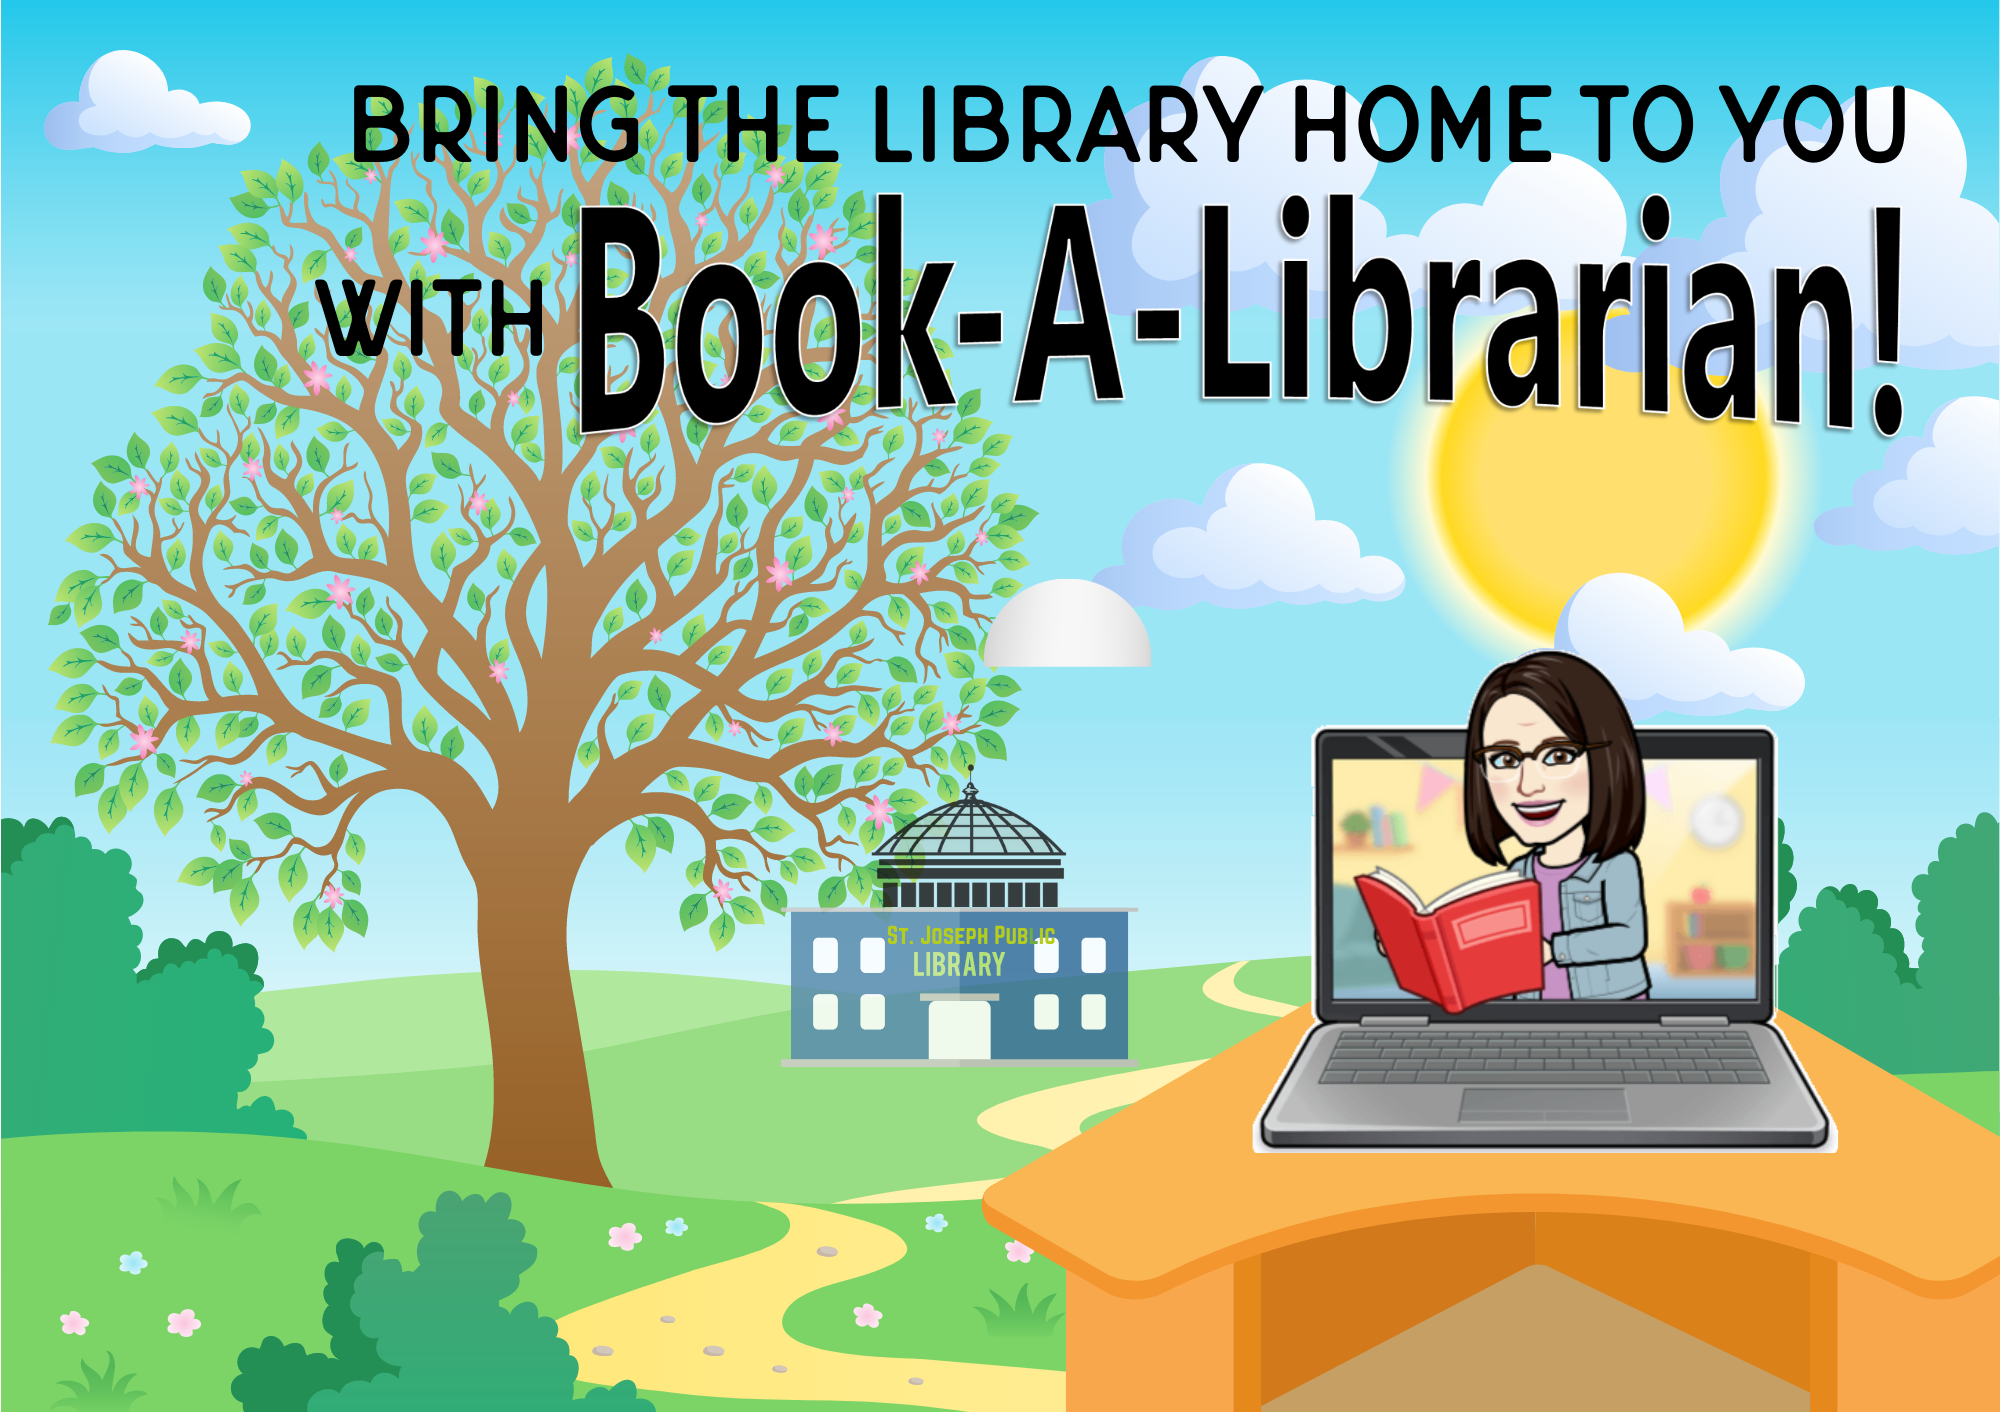 Bring the library home to you with Book-A-Librarian